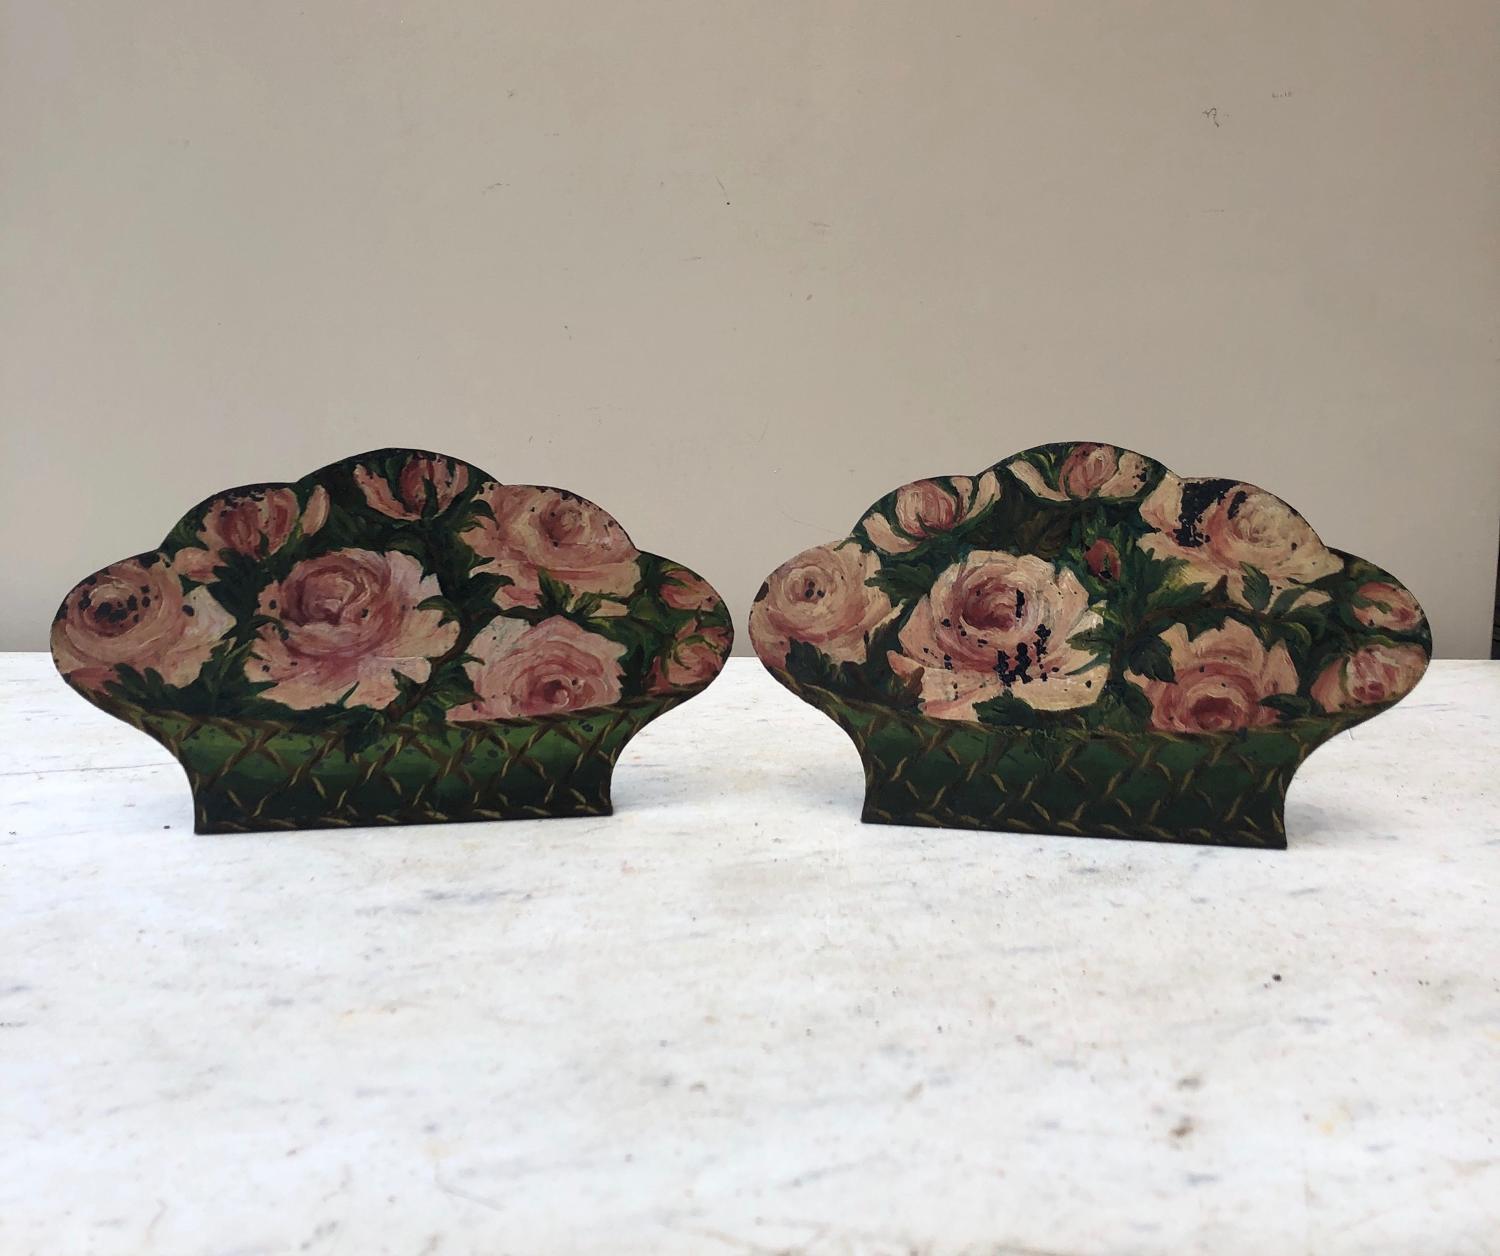 Edwardian Pair of Toleware Bookends...Roses in Baskets